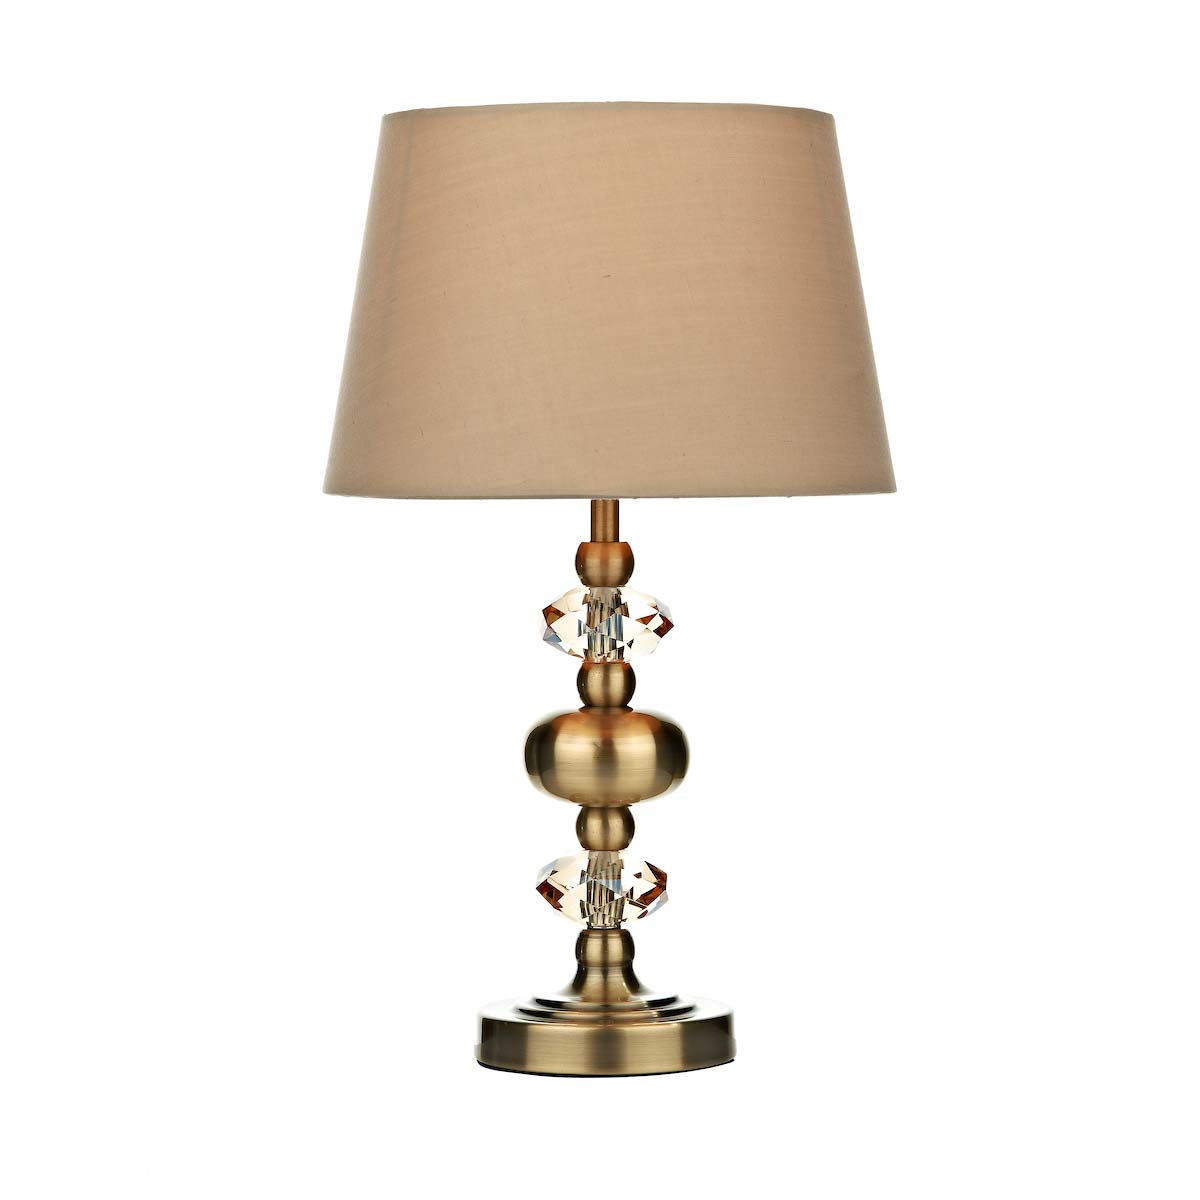 Dar Edith Traditional 1 Light Touch Dimming Table Lamp Antique Brass